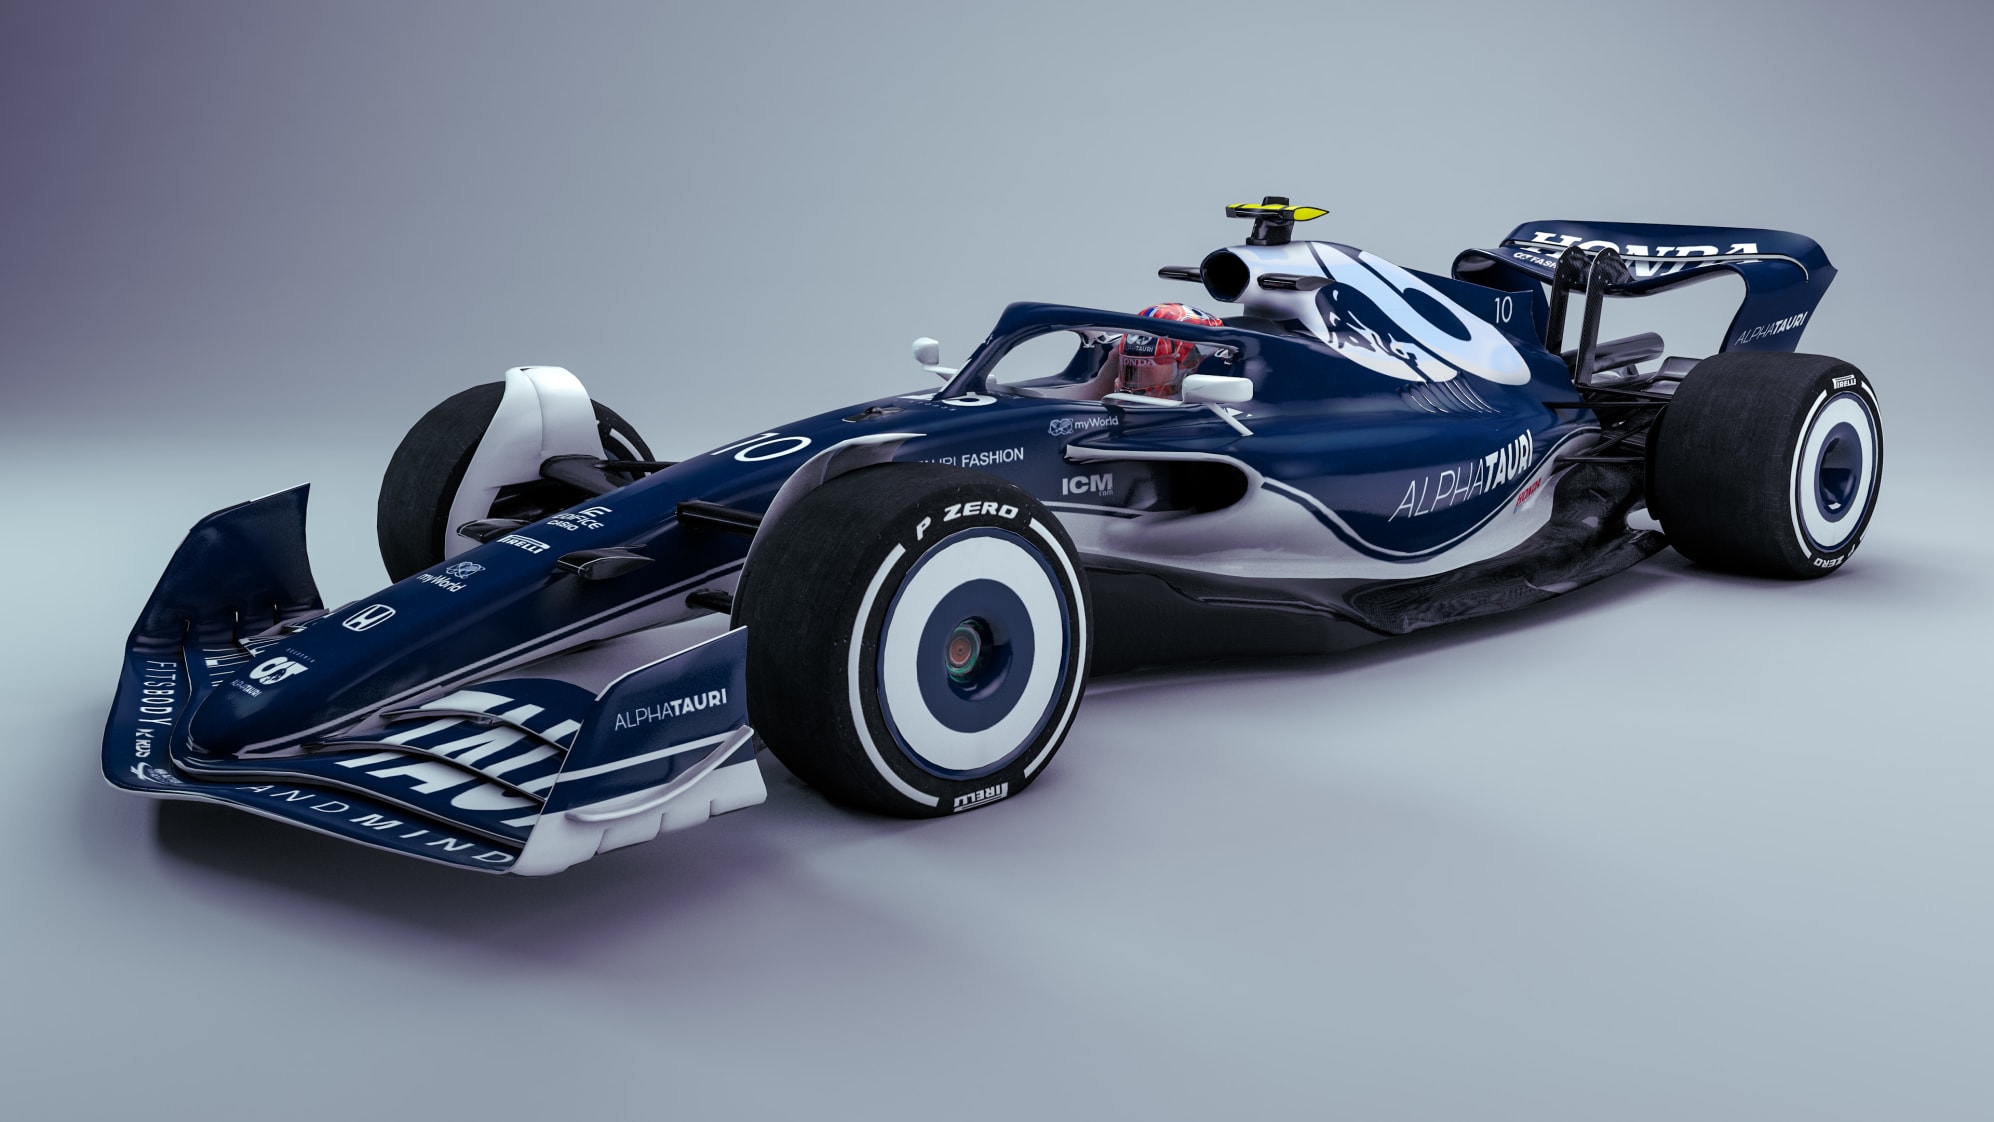 MUSTSEE Check out the teams' 2021 liveries on the 2022 car Formula 1®